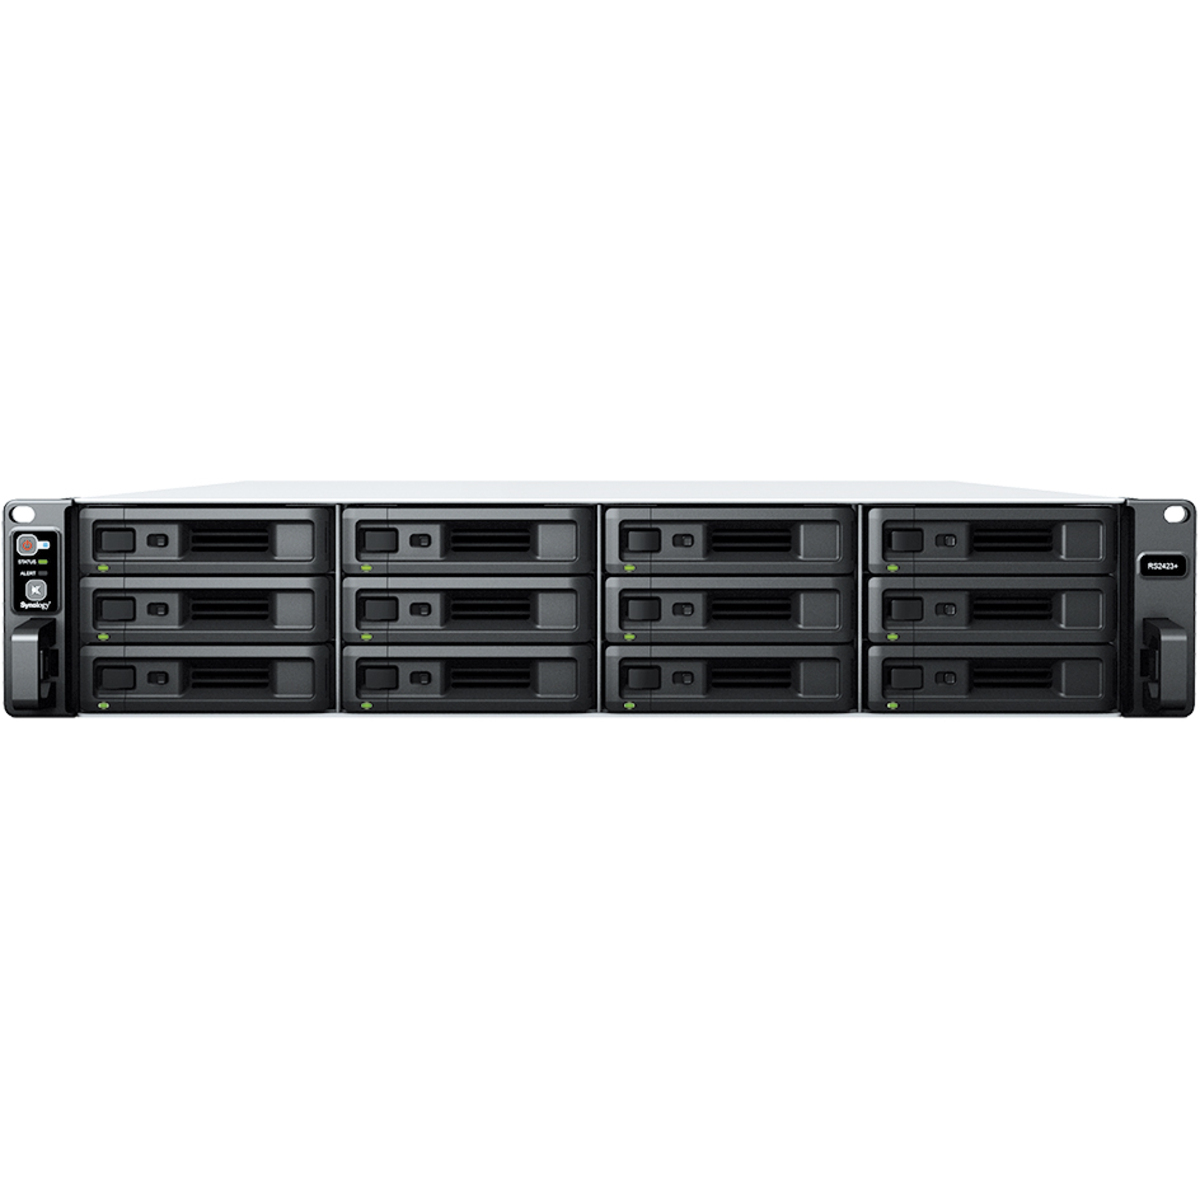 Synology RackStation RS2423+ 168tb 12-Bay RackMount Multimedia / Power User / Business NAS - Network Attached Storage Device 12x14tb Toshiba Enterprise Capacity MG07ACA14TE 3.5 7200rpm SATA 6Gb/s HDD ENTERPRISE Class Drives Installed - Burn-In Tested RackStation RS2423+